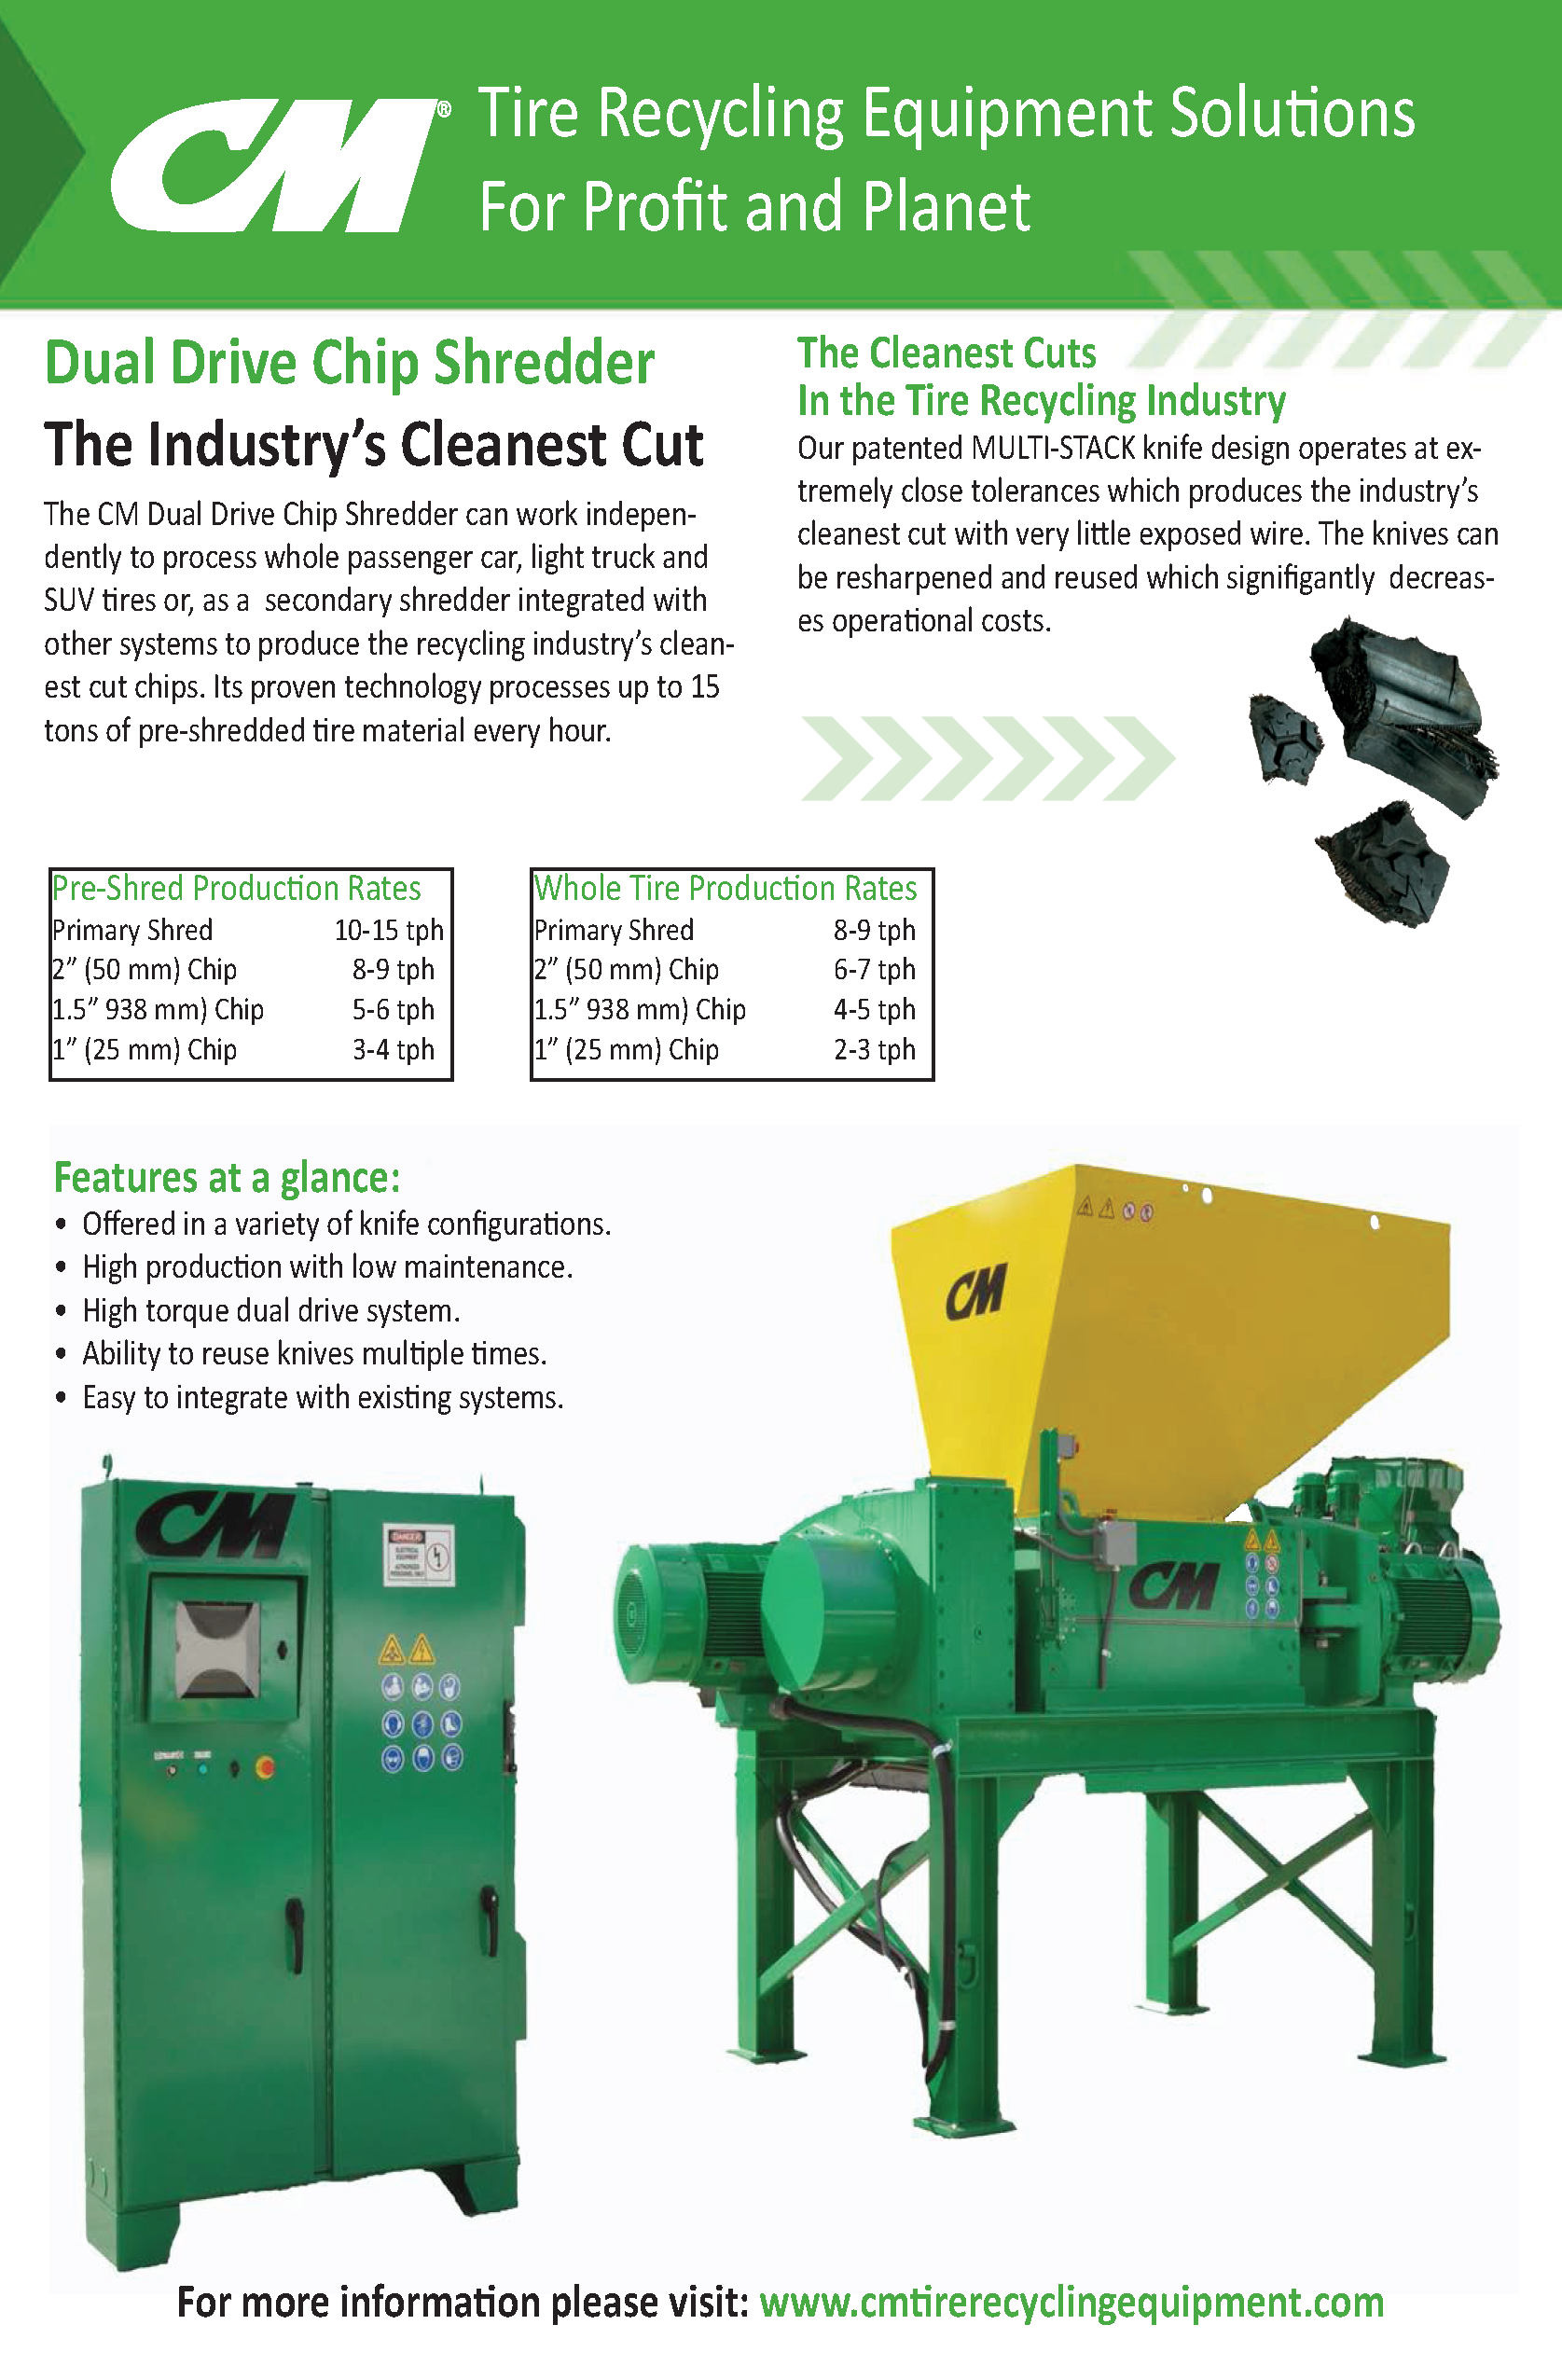 Learn more by viewing the CM Dual Drive Chip Shredder Brochure.